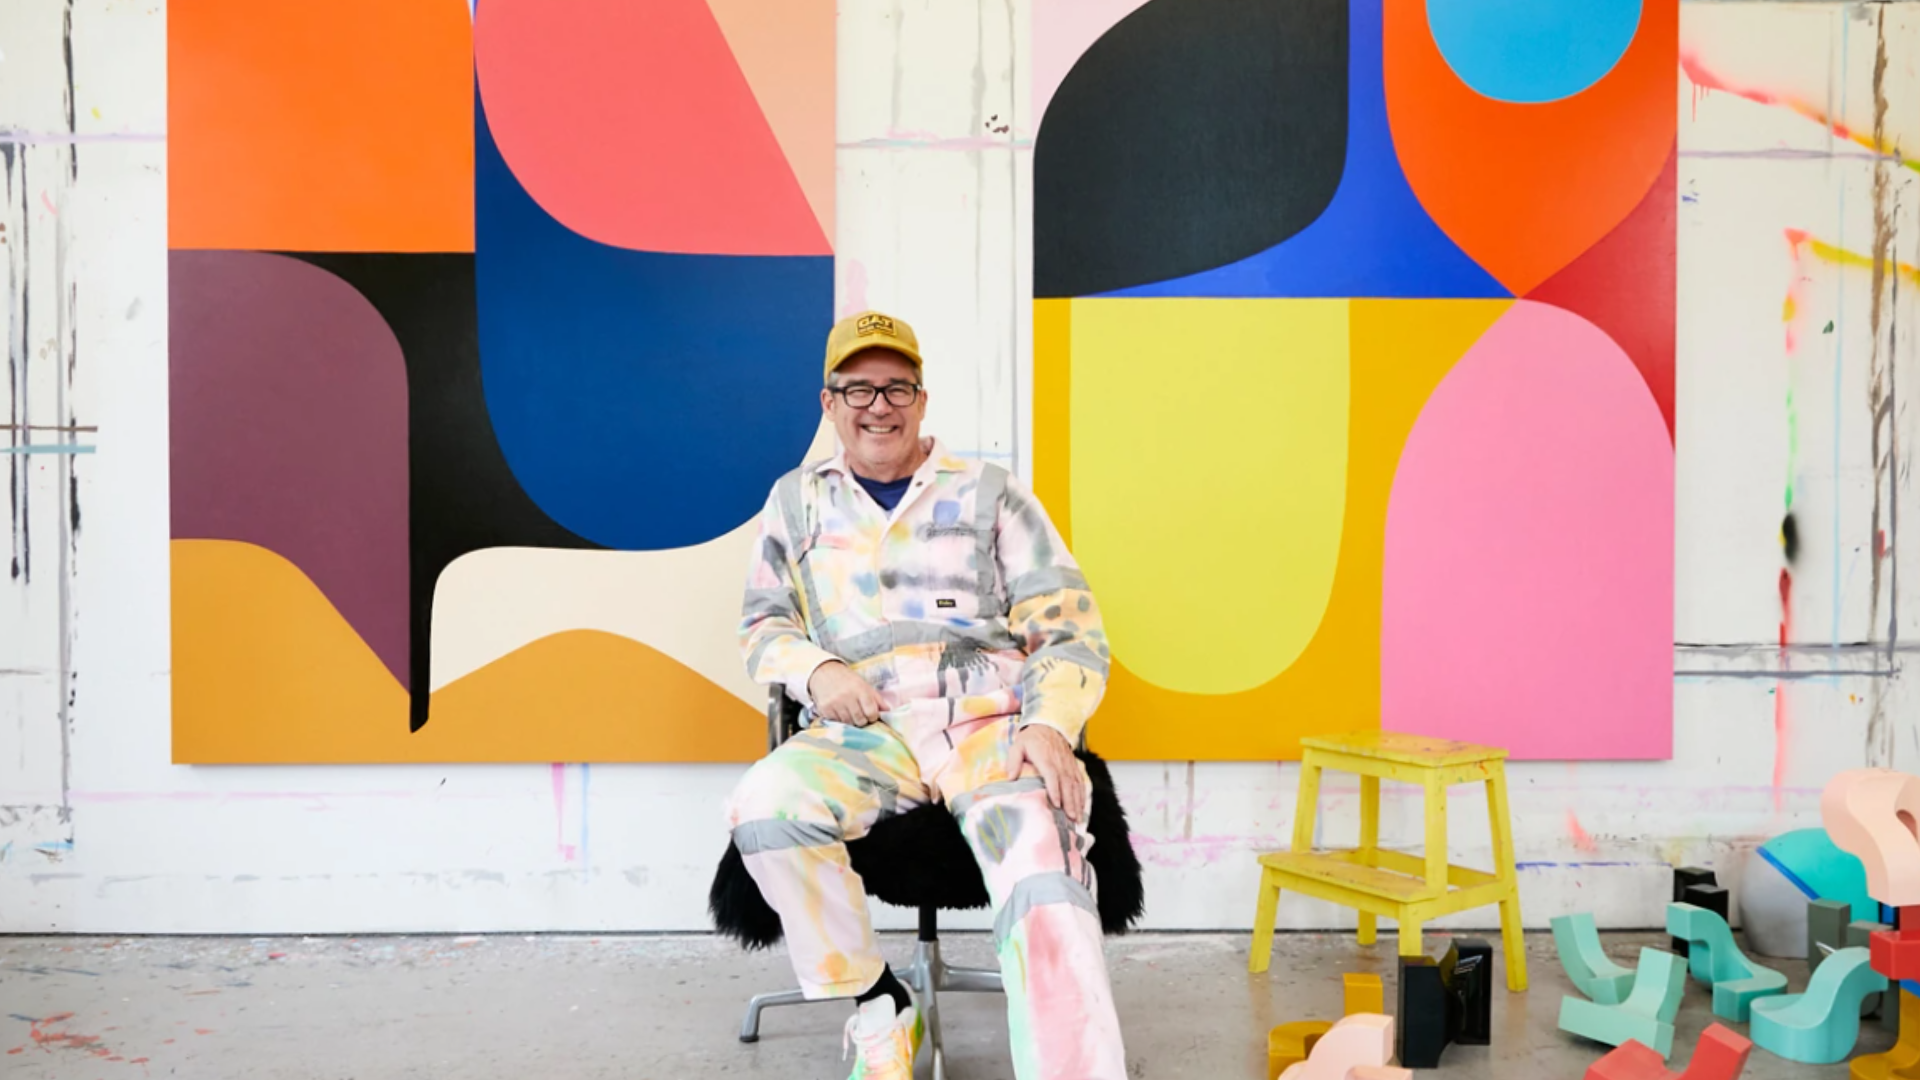 In A Room with Stephen Ormandy